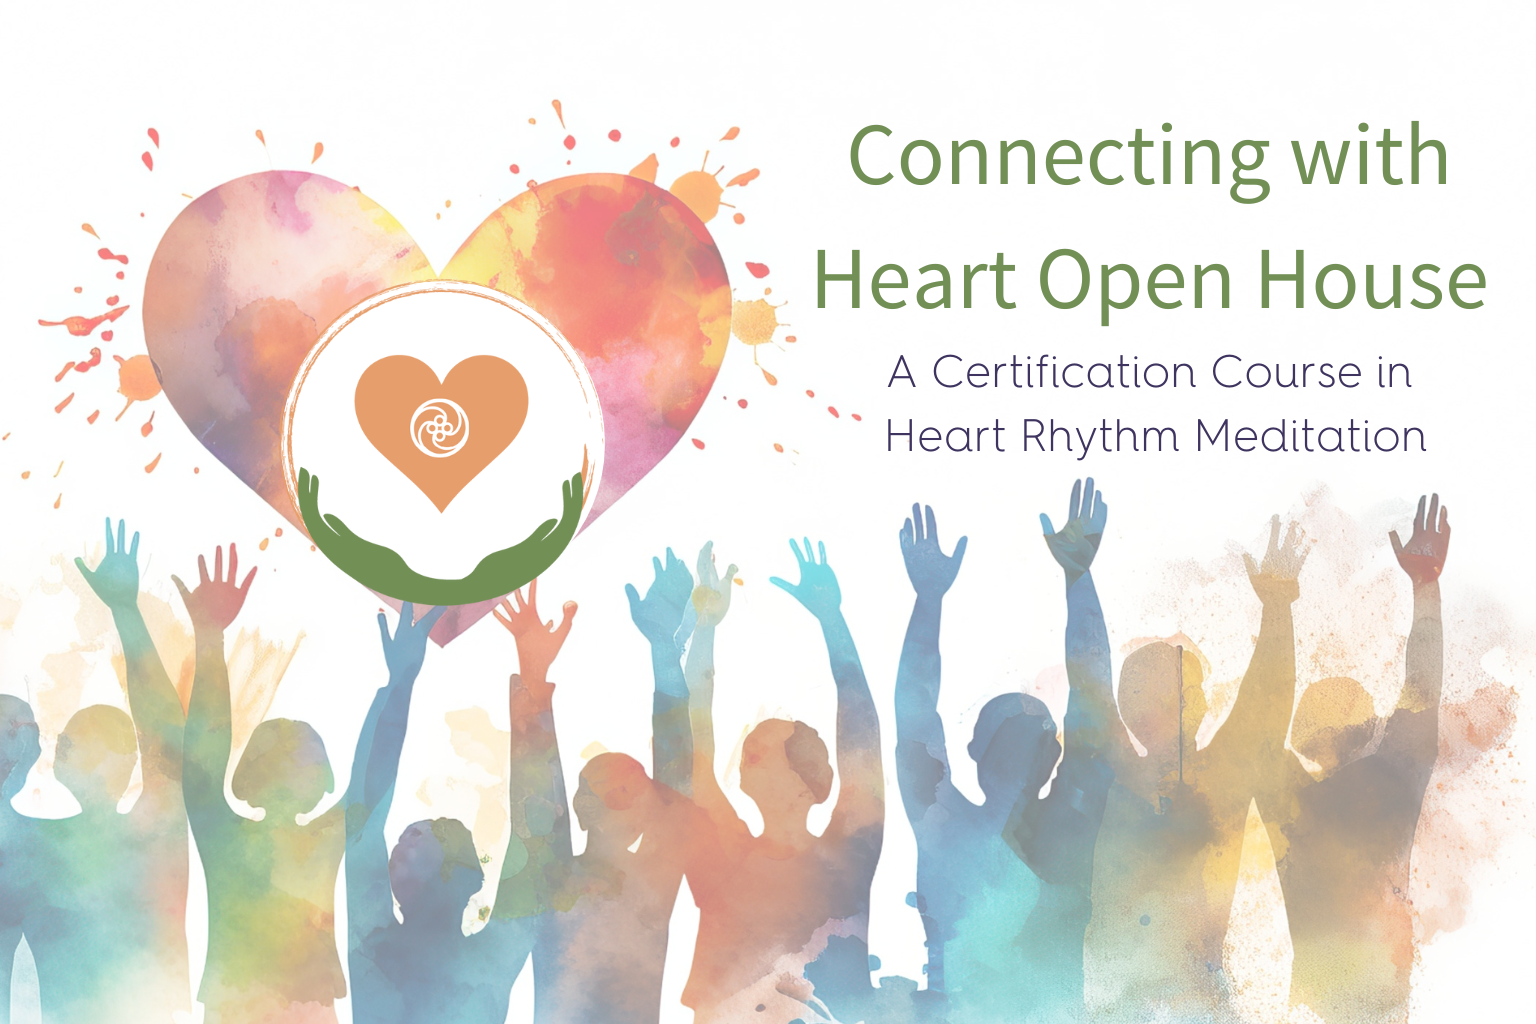 Connecting with Heart Open House 12/13